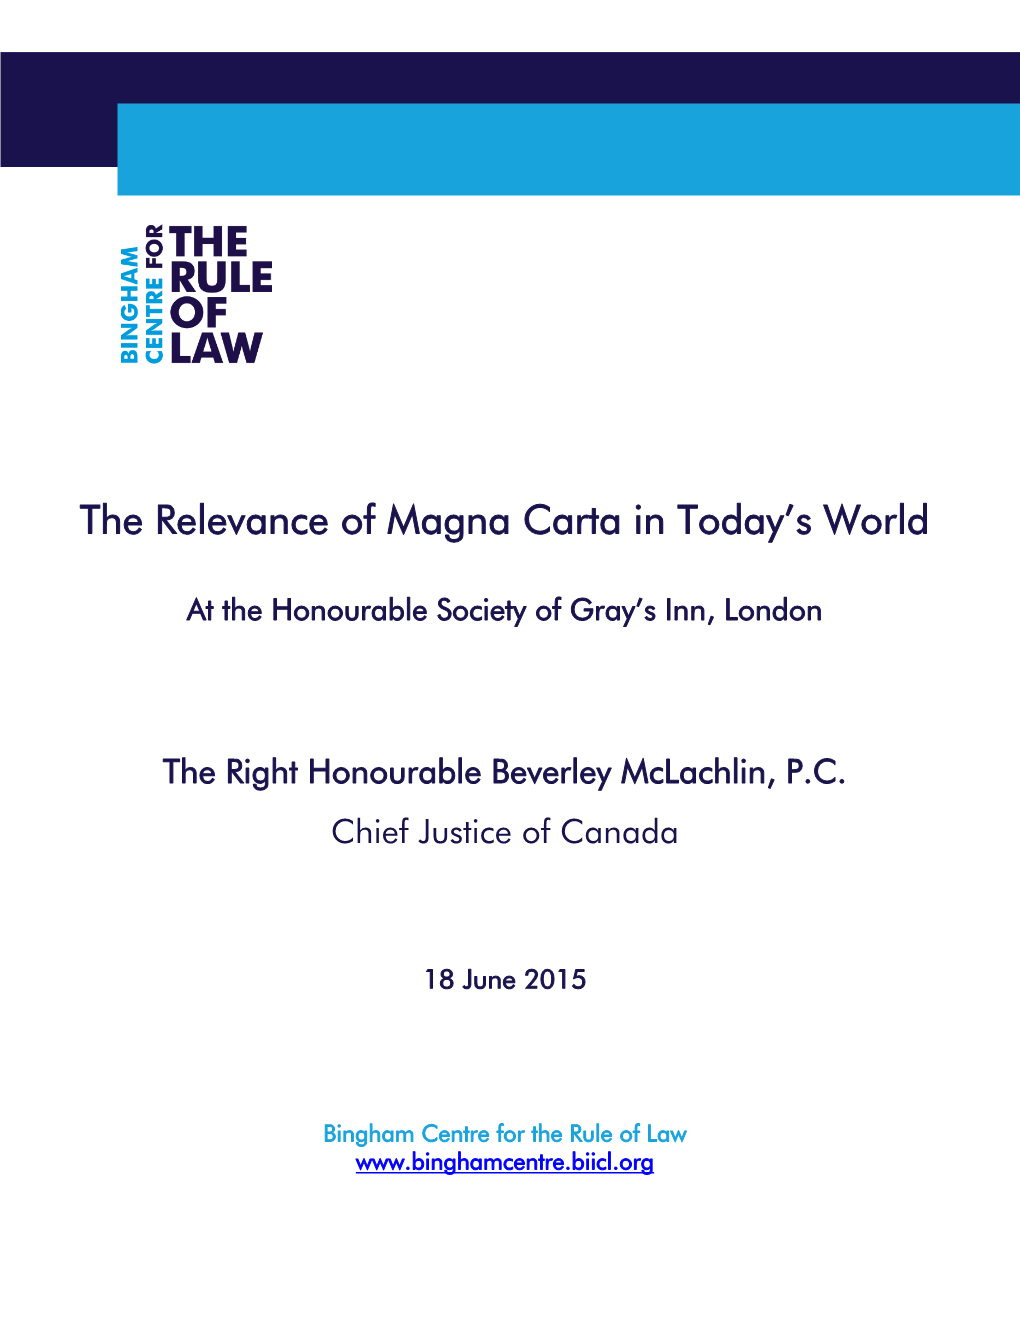 The Relevance of Magna Carta in Today's World